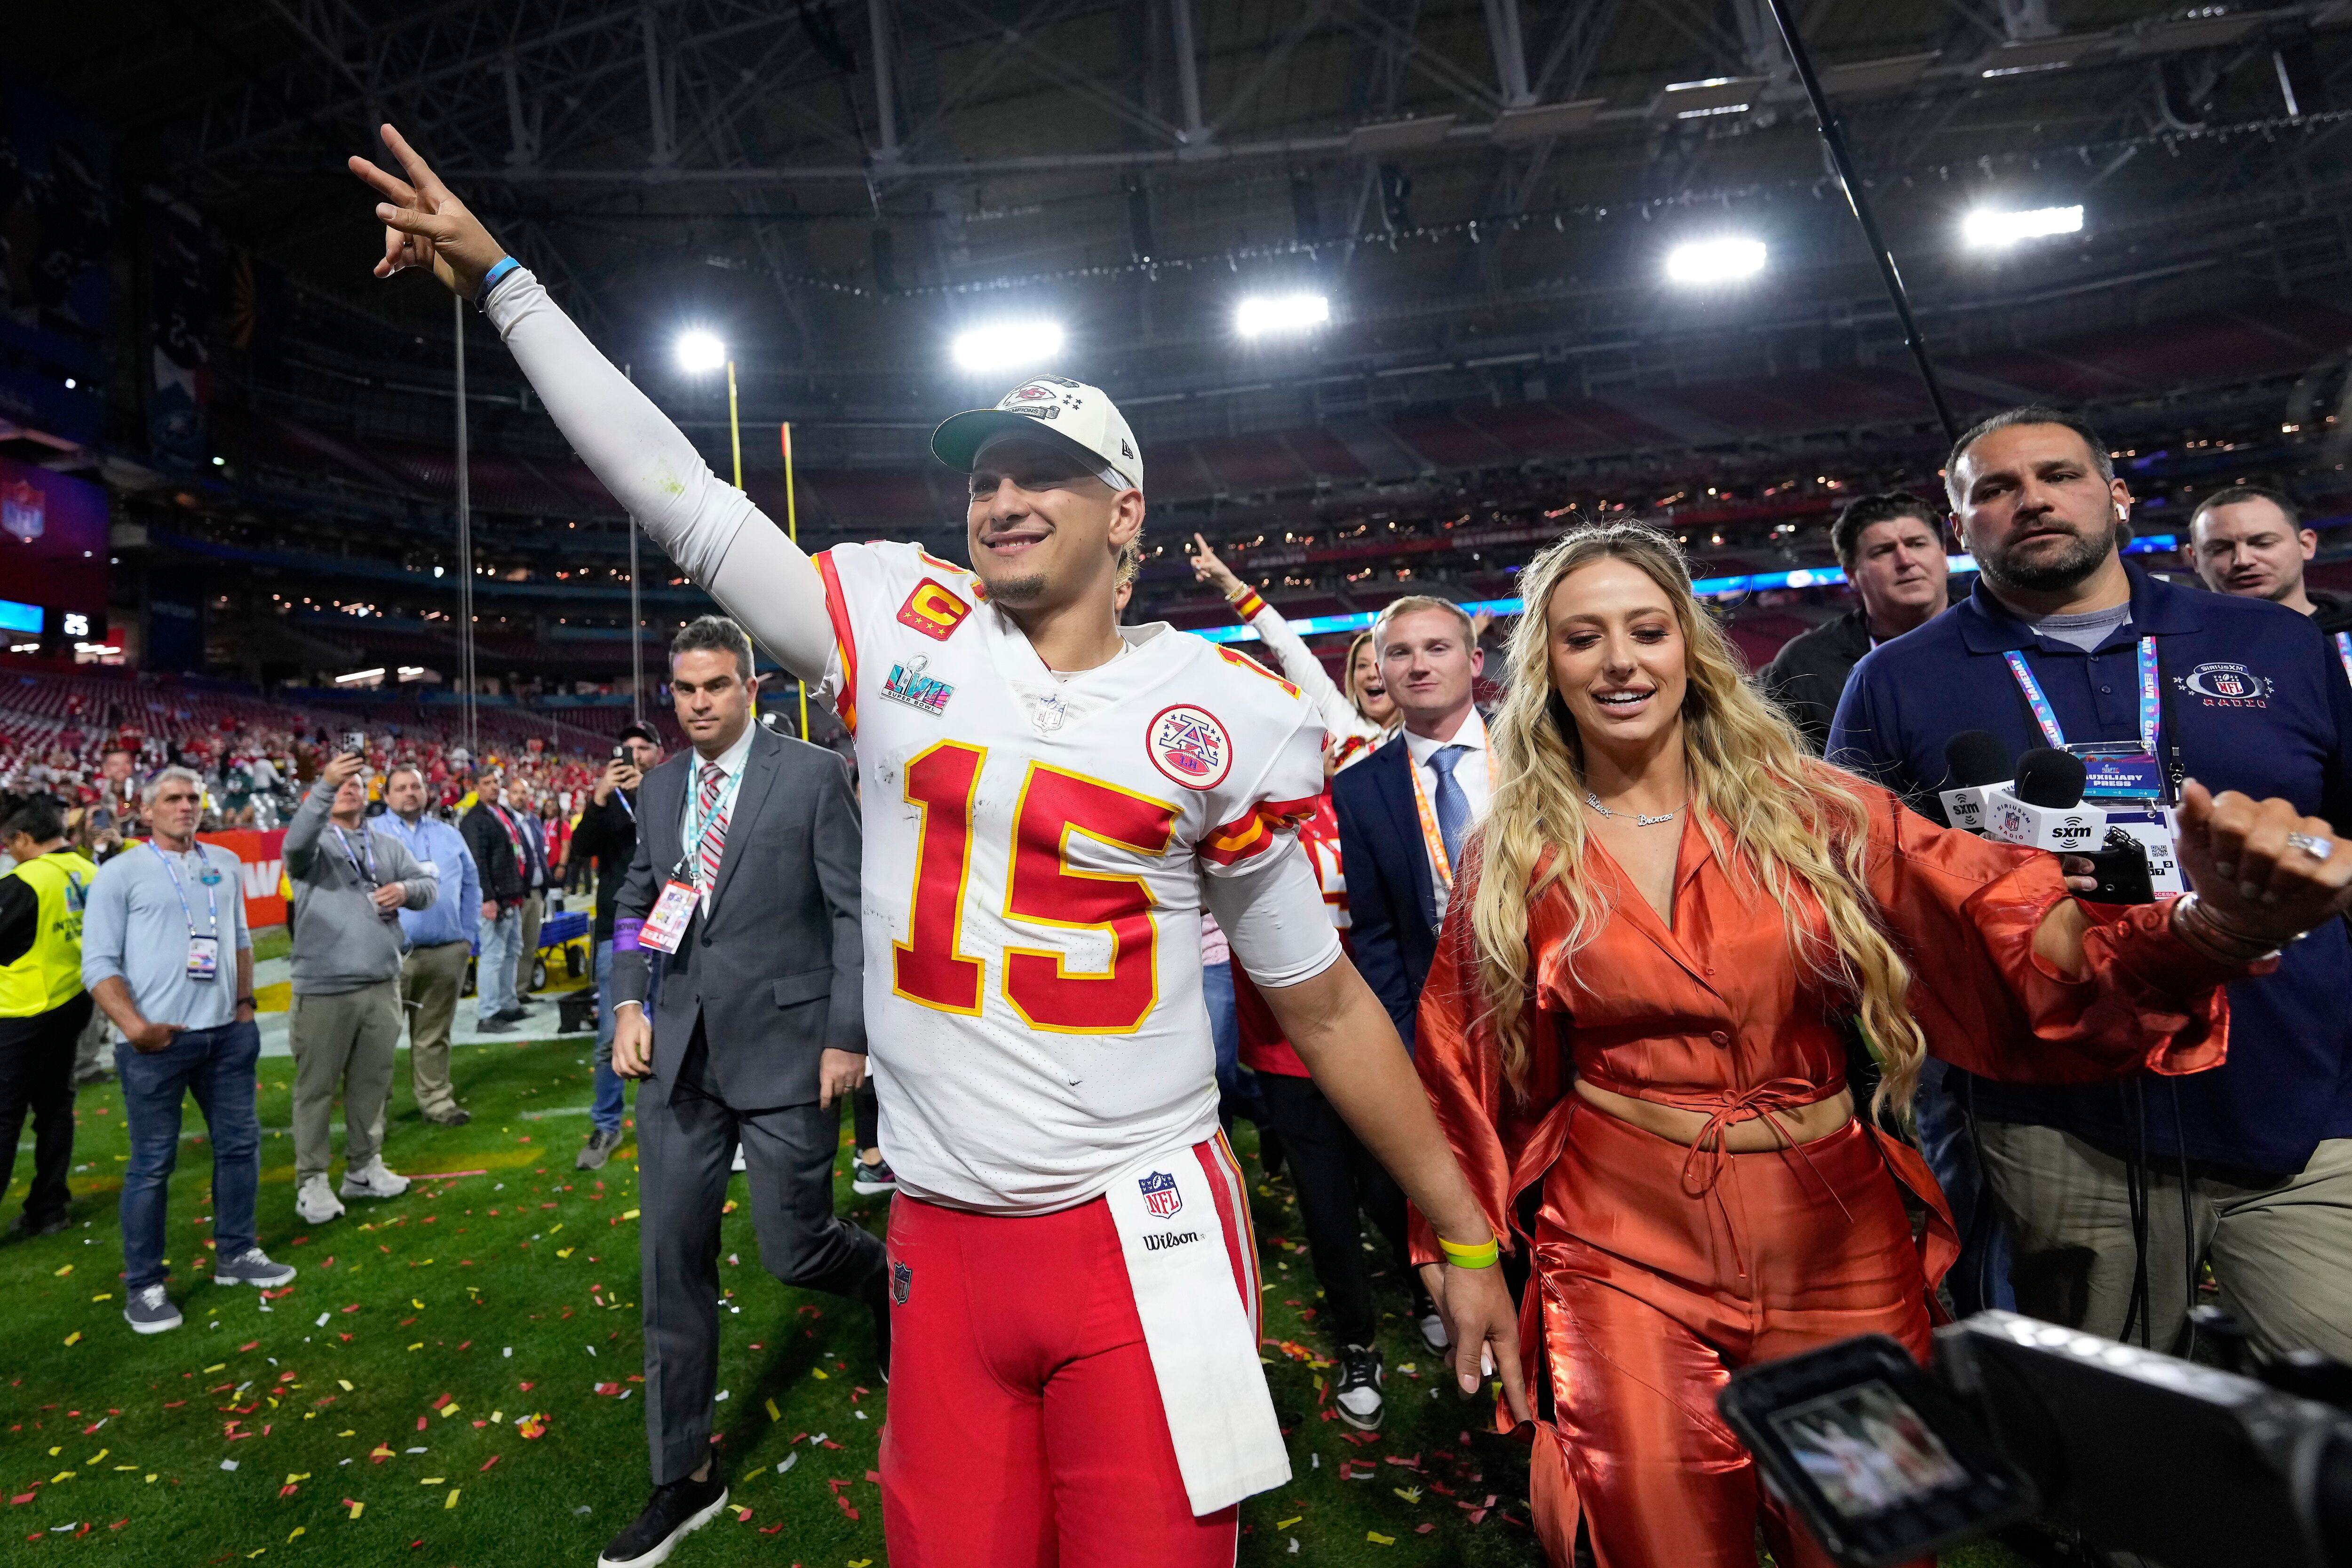 Super Bowl: You can bet Chiefs' run has Hollywood Casino, other